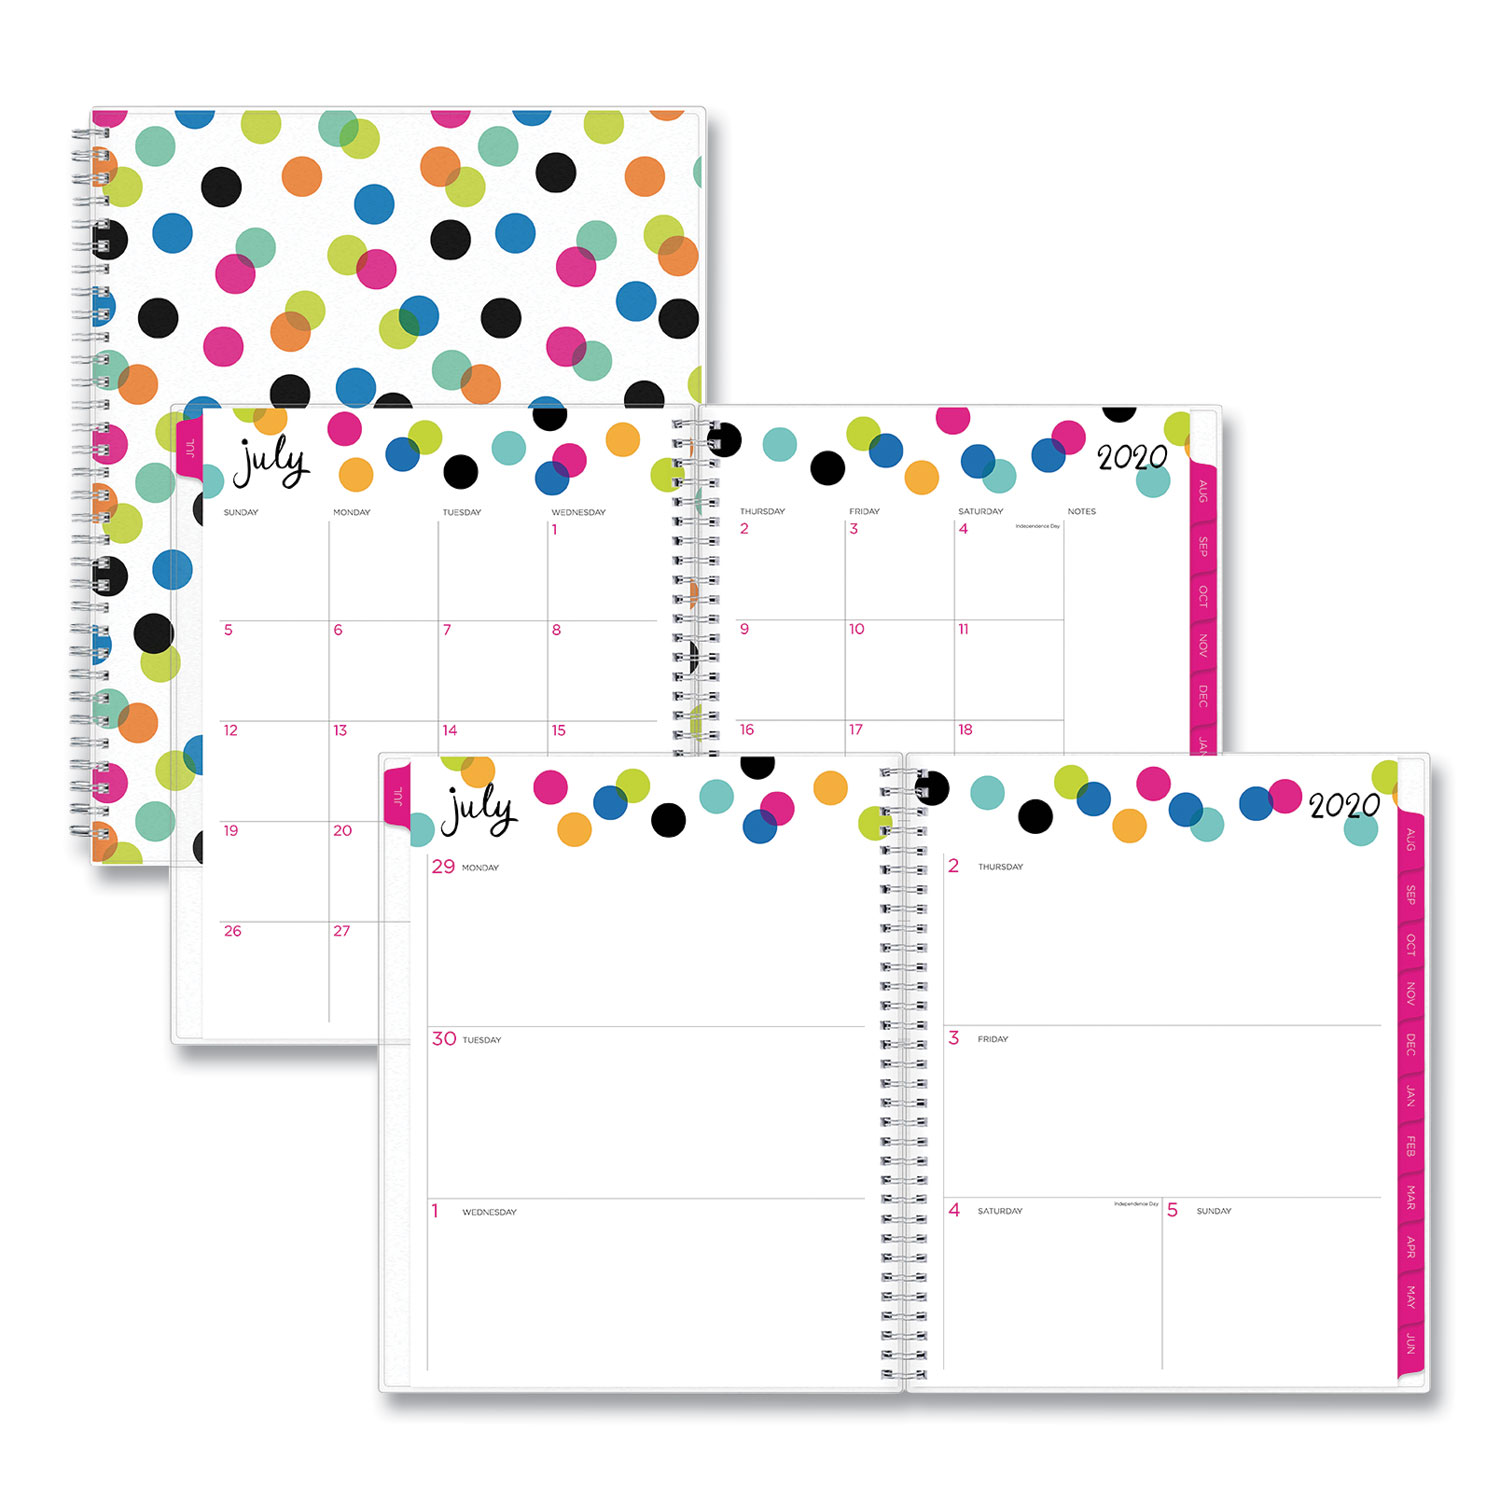 Blue Sky® Ampersand Dots Academic Year Weekly/Monthly Planner, 11 x 8.5, Multicolor, 2020-2021